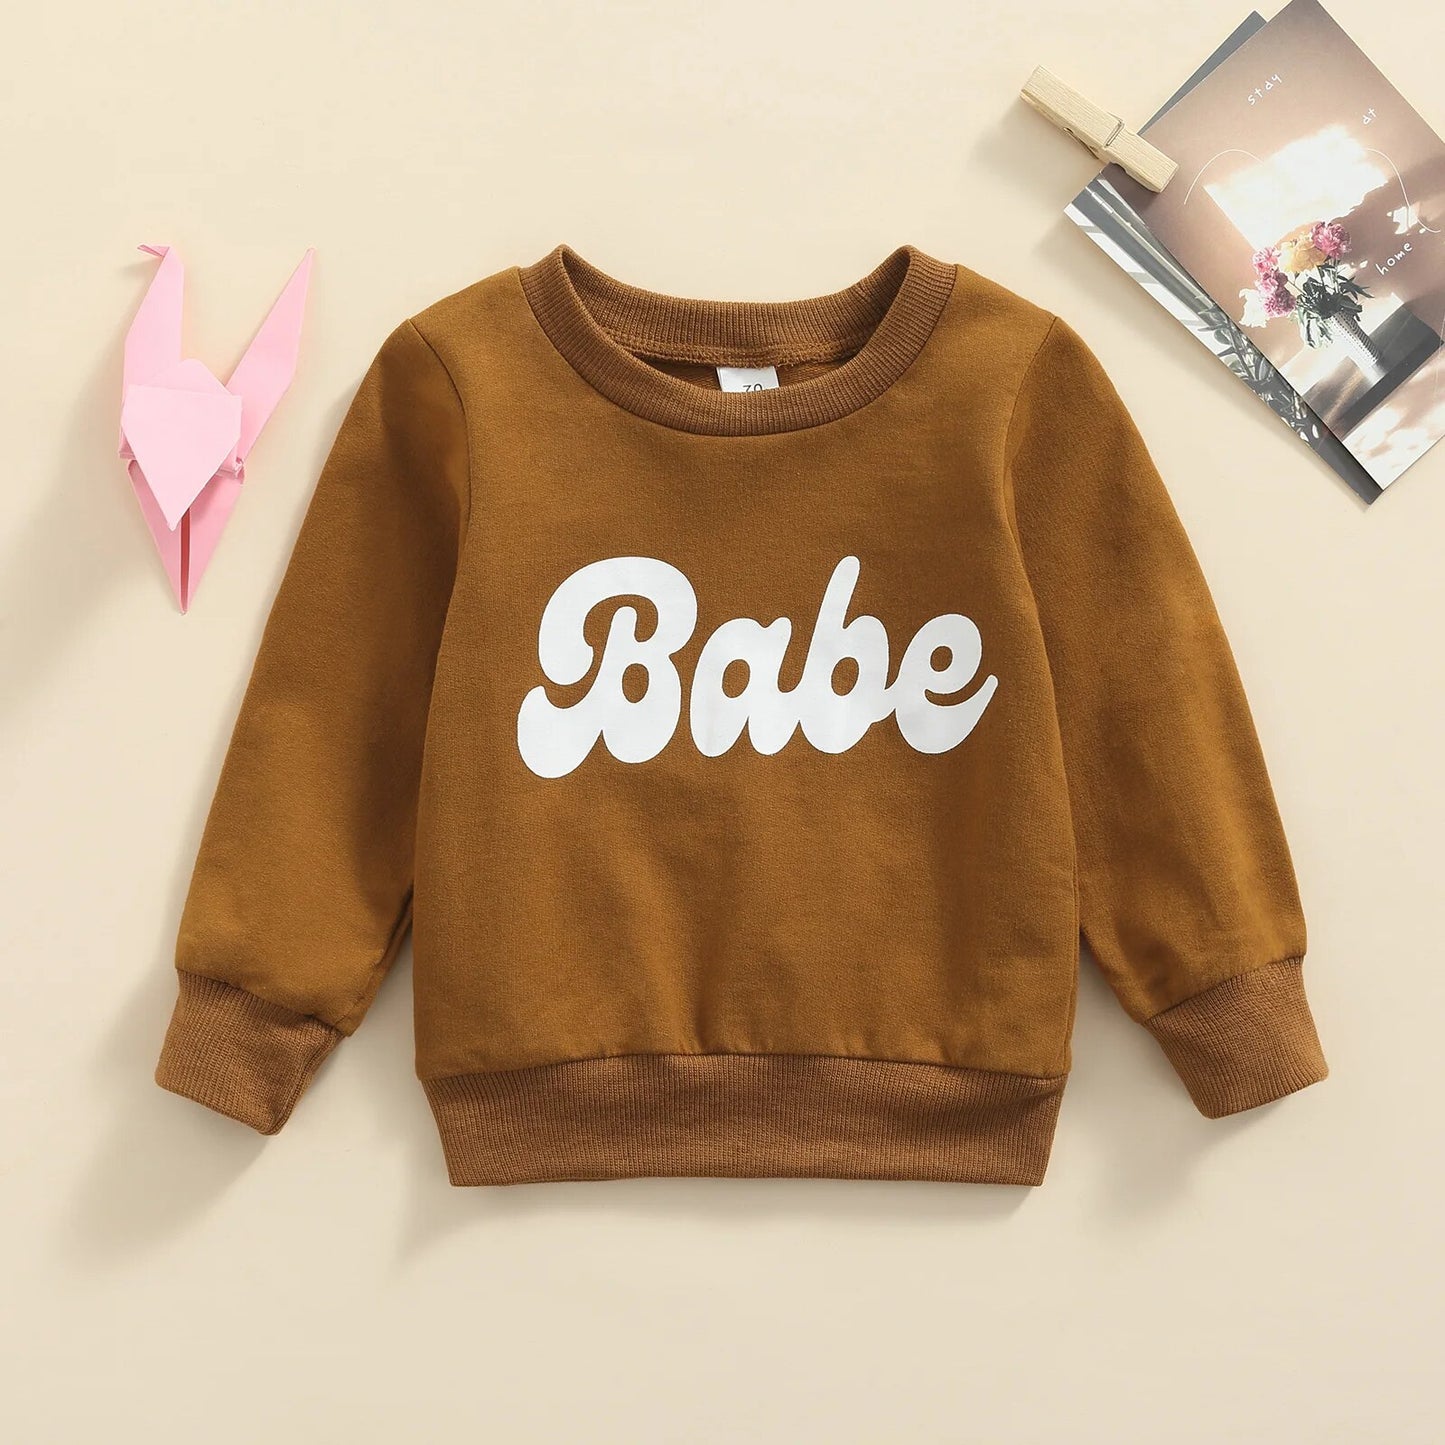 FOCUSNORM 4 Colors Lovely Baby Girls Boys Sweatshirt Tops Outfits 0-3Y Letter Printed Long Sleeve Pullover Outwear